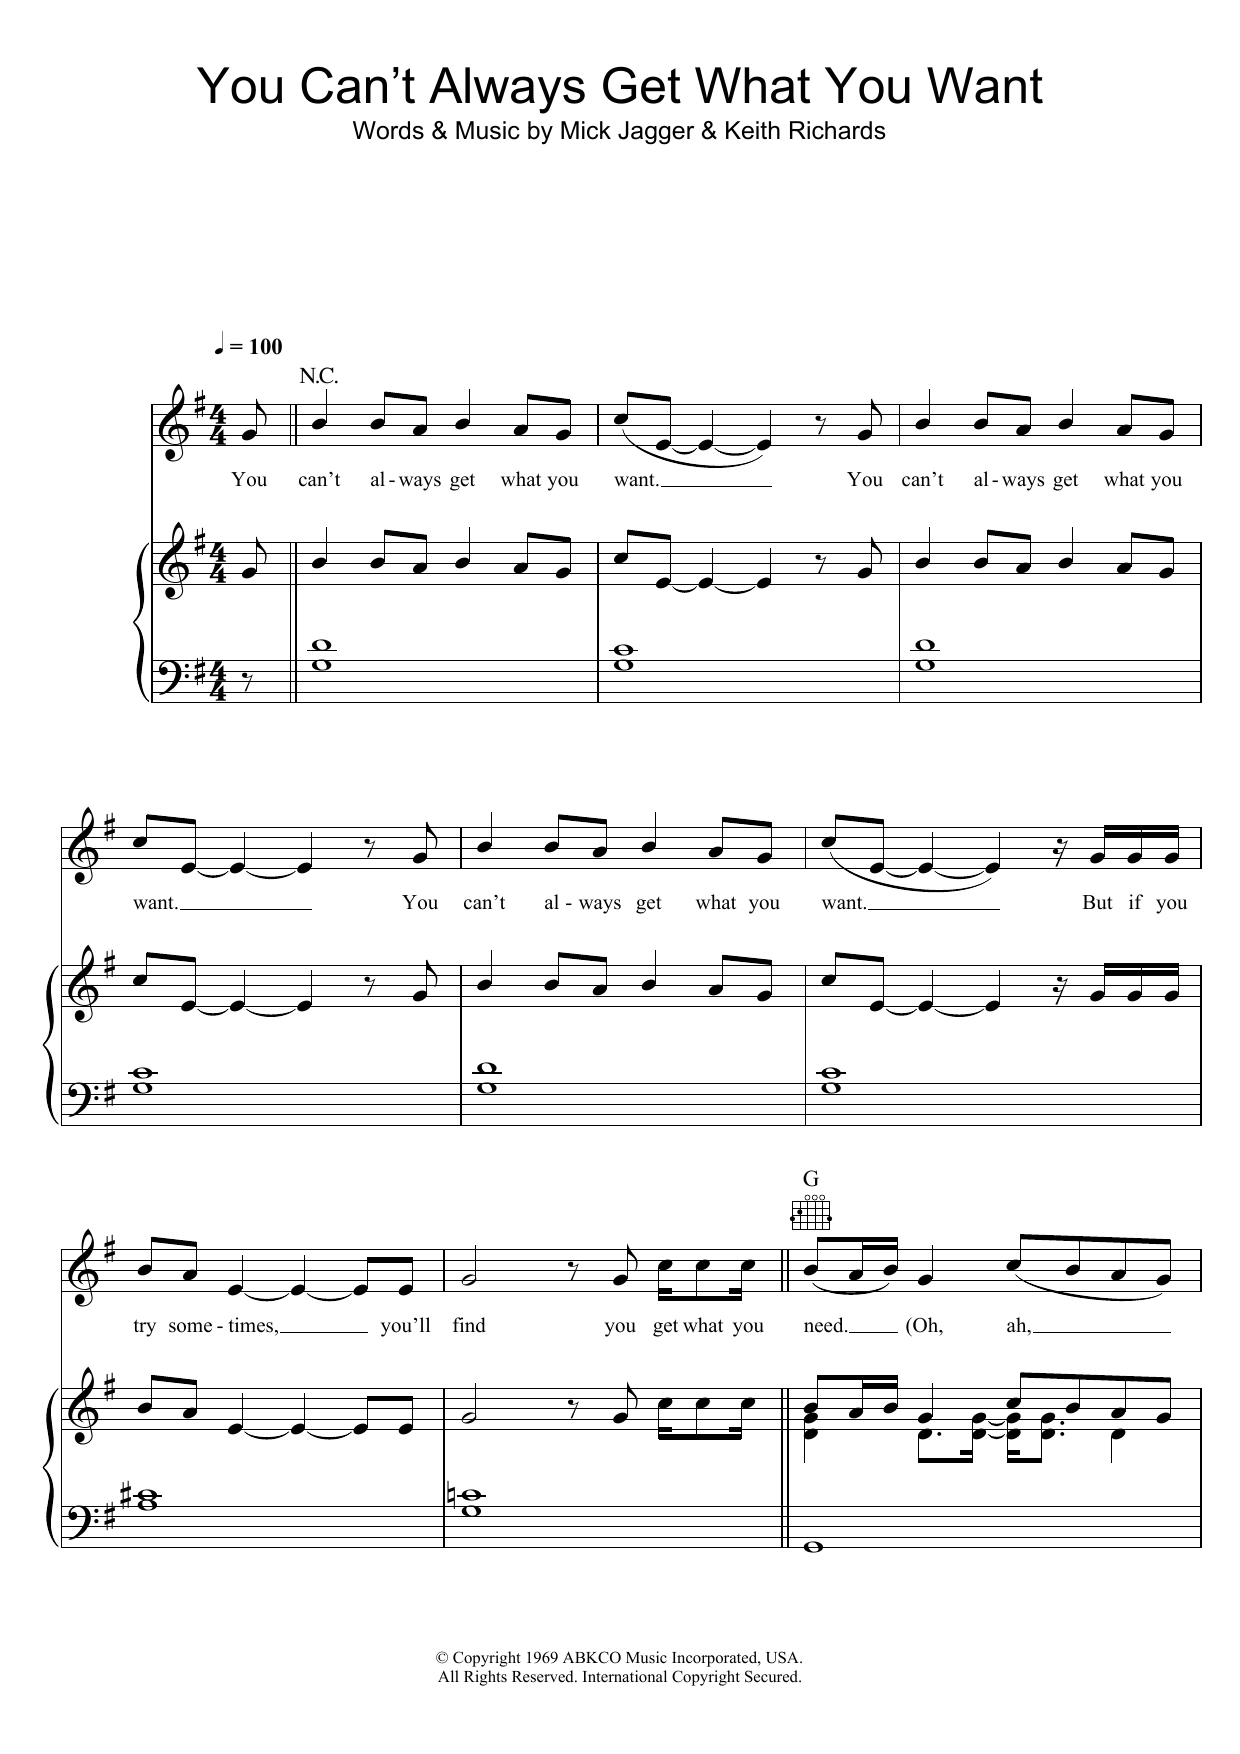 Download Glee Cast You Can't Always Get What You Want Sheet Music